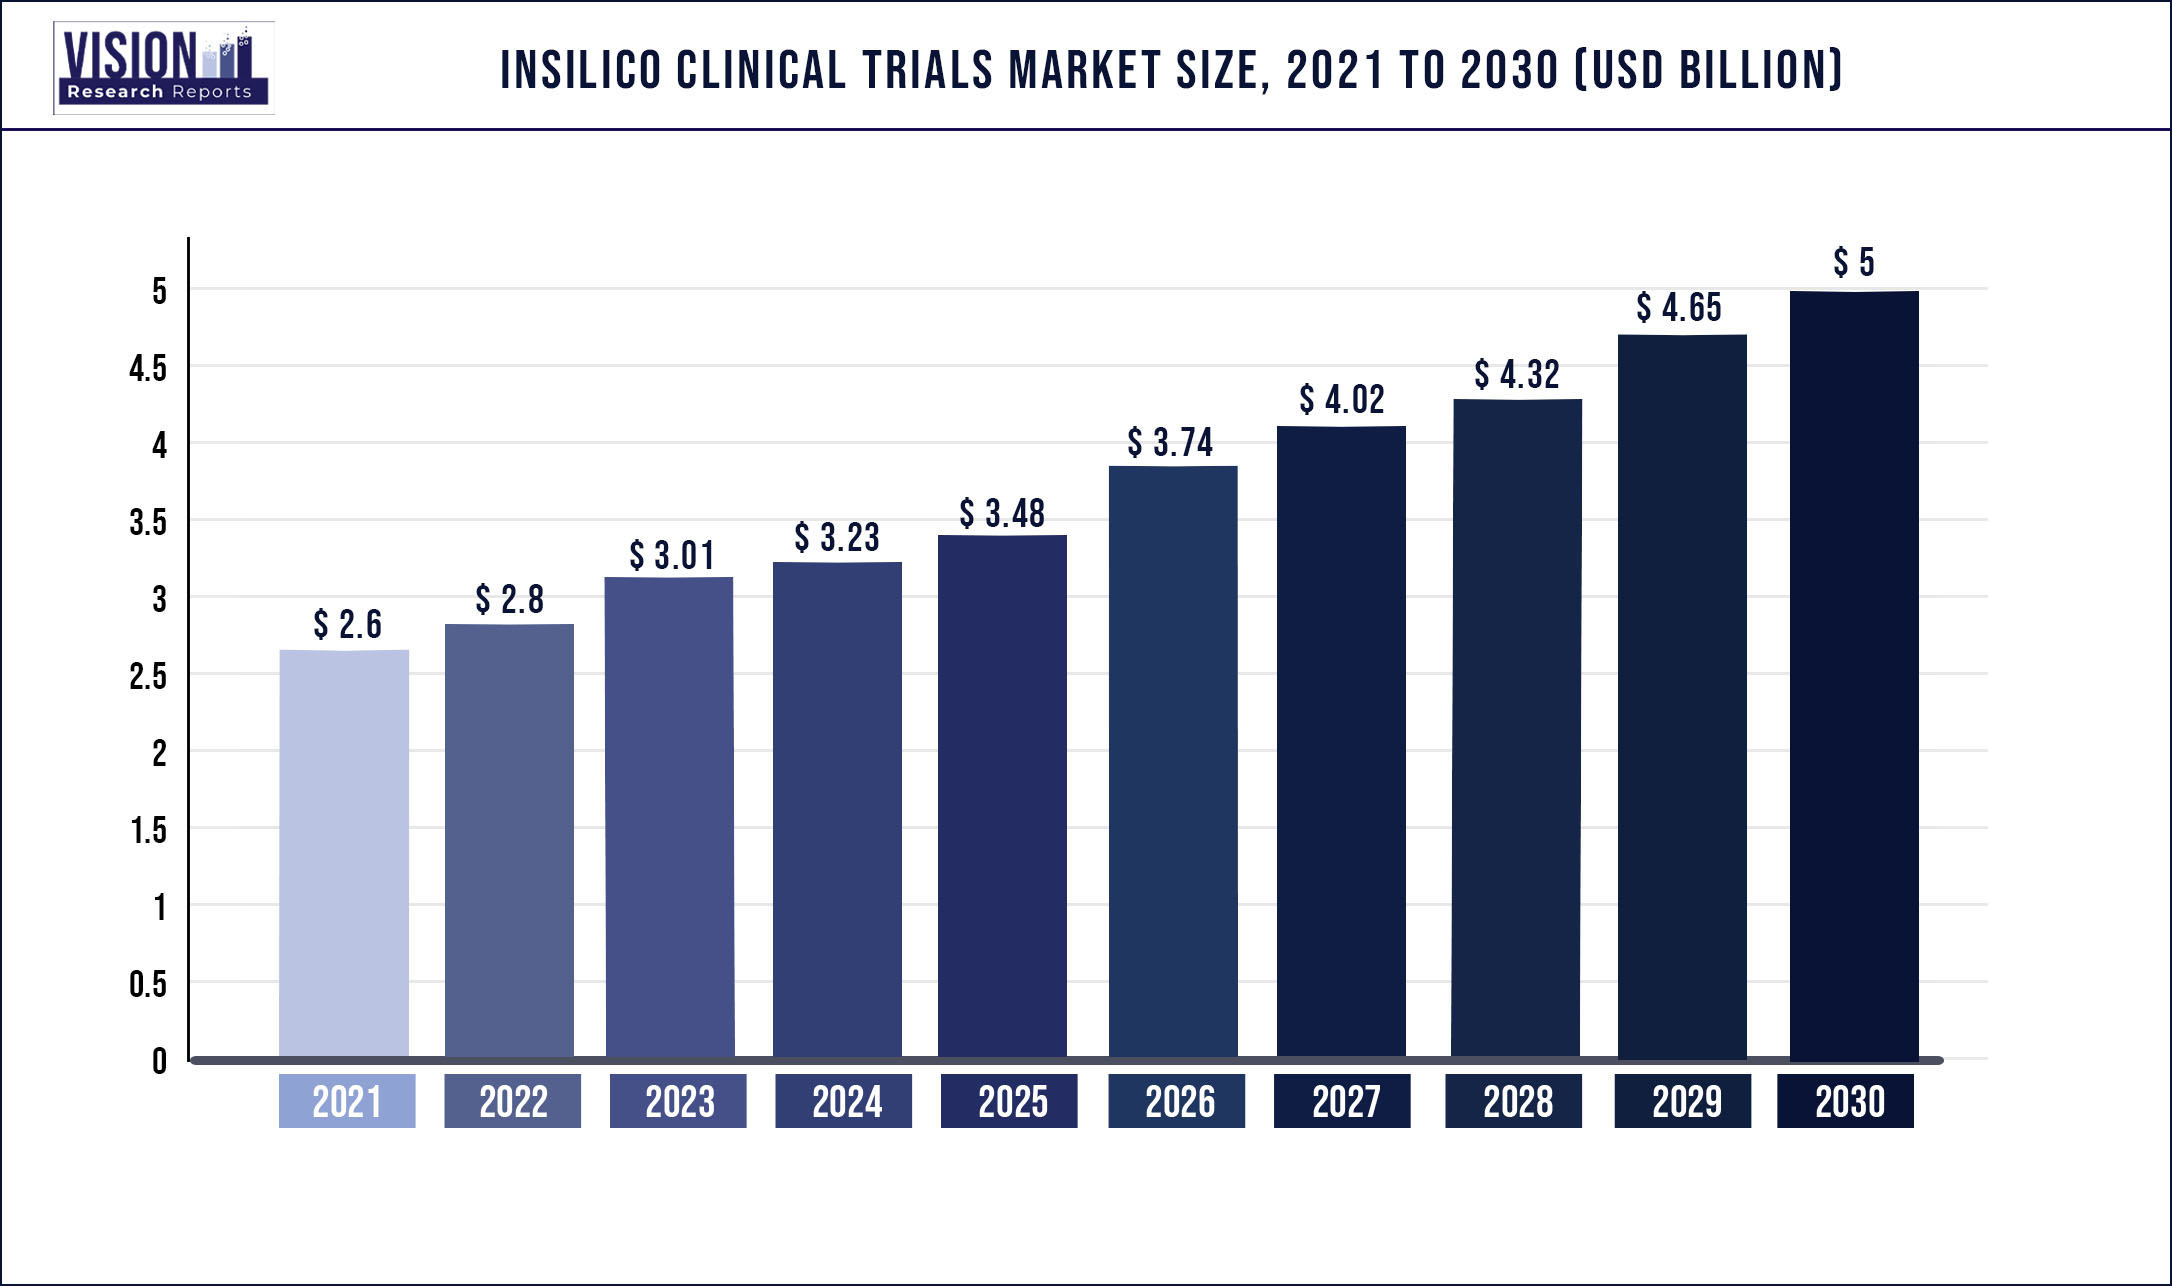 Insilico Clinical Trials Market Size 2021 to 2030